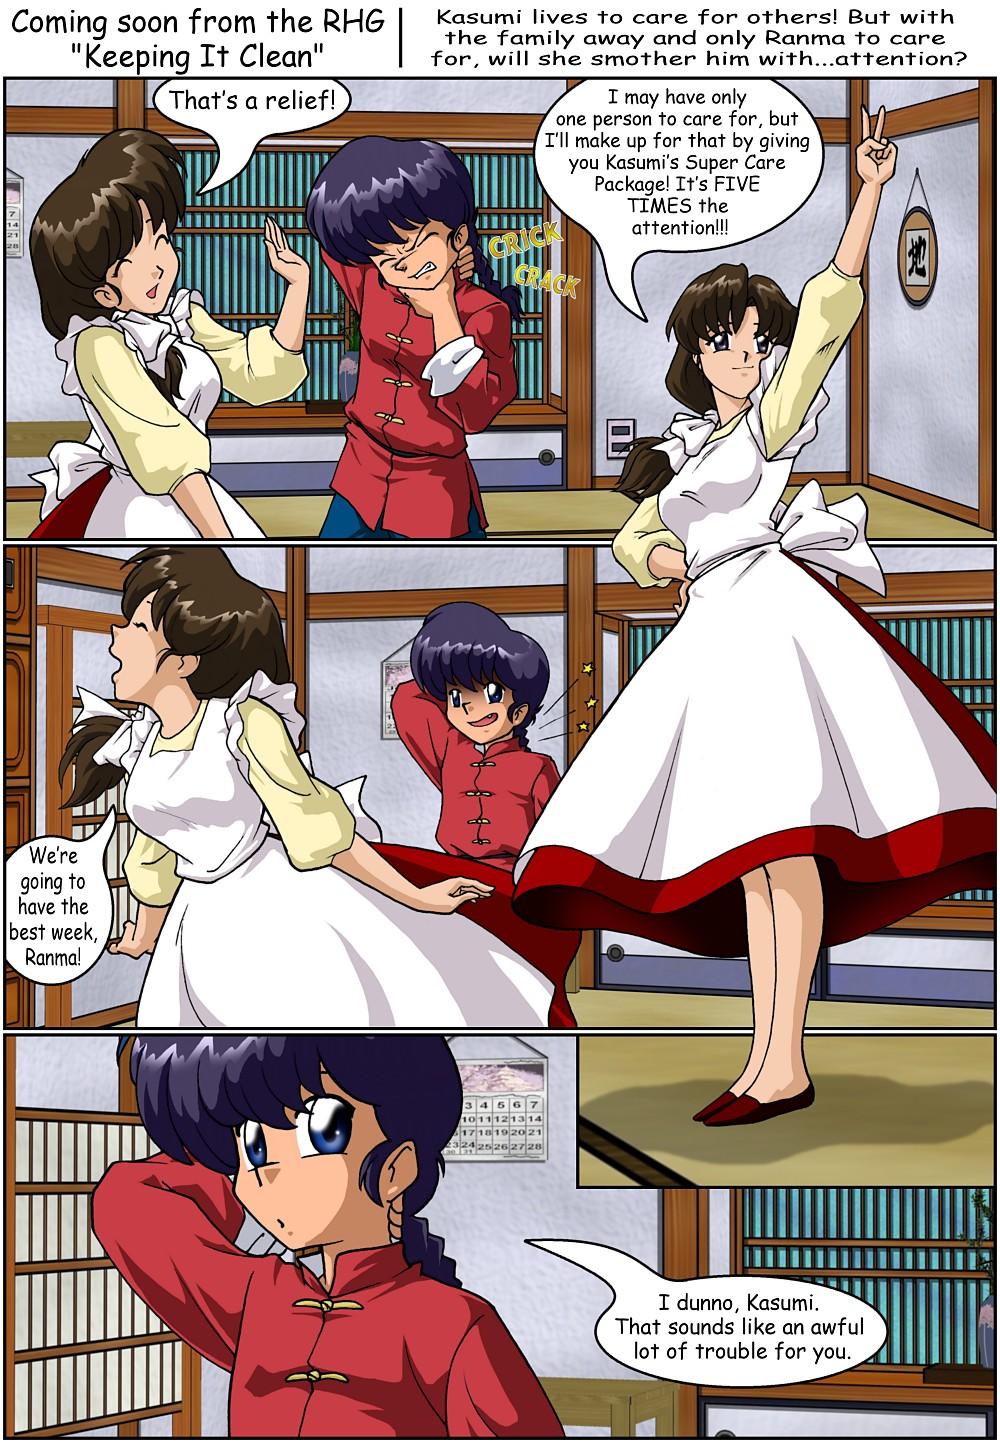 A Ranma Christmas Story - part 3